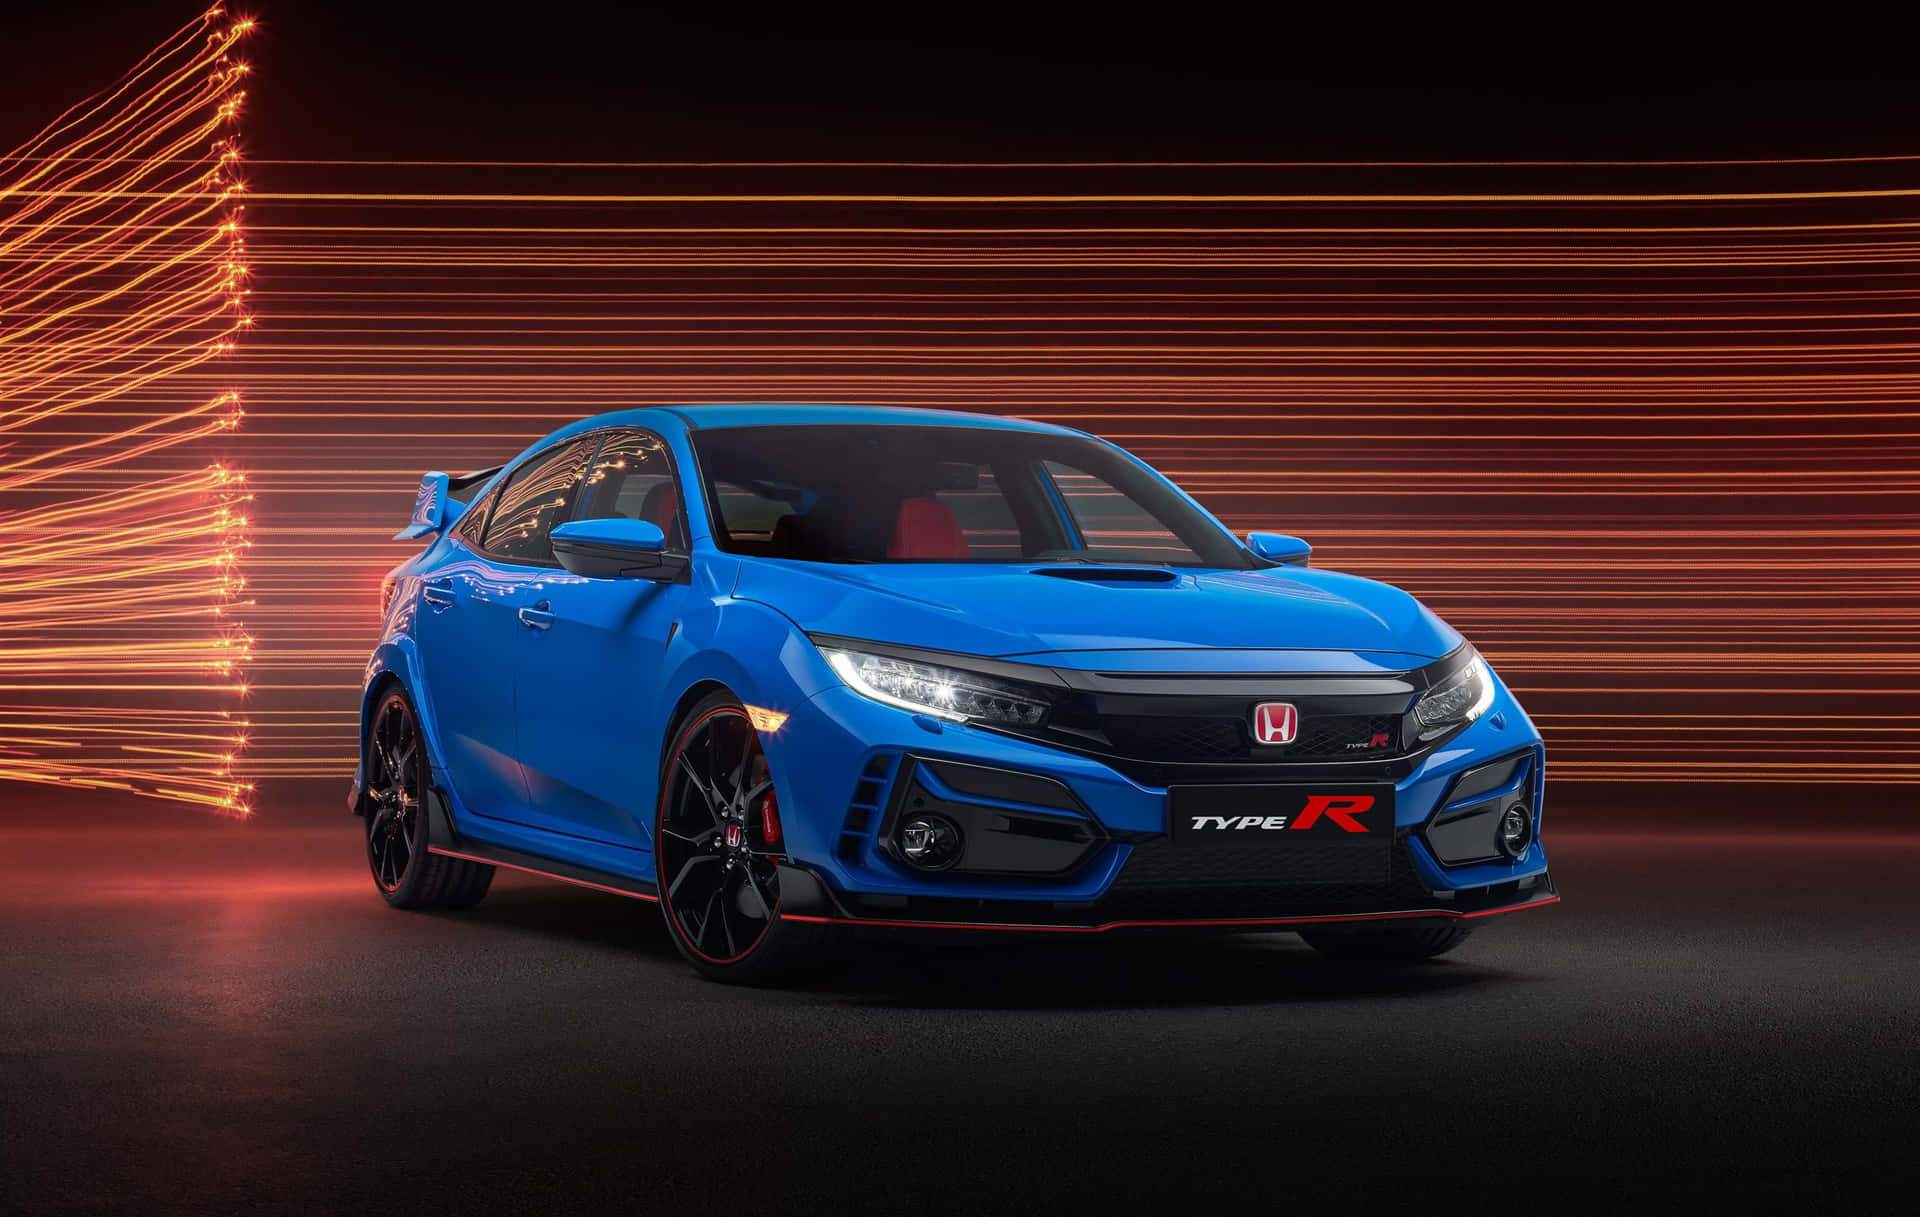 Get a taste of racecar performance with the Honda Civic Type R Wallpaper